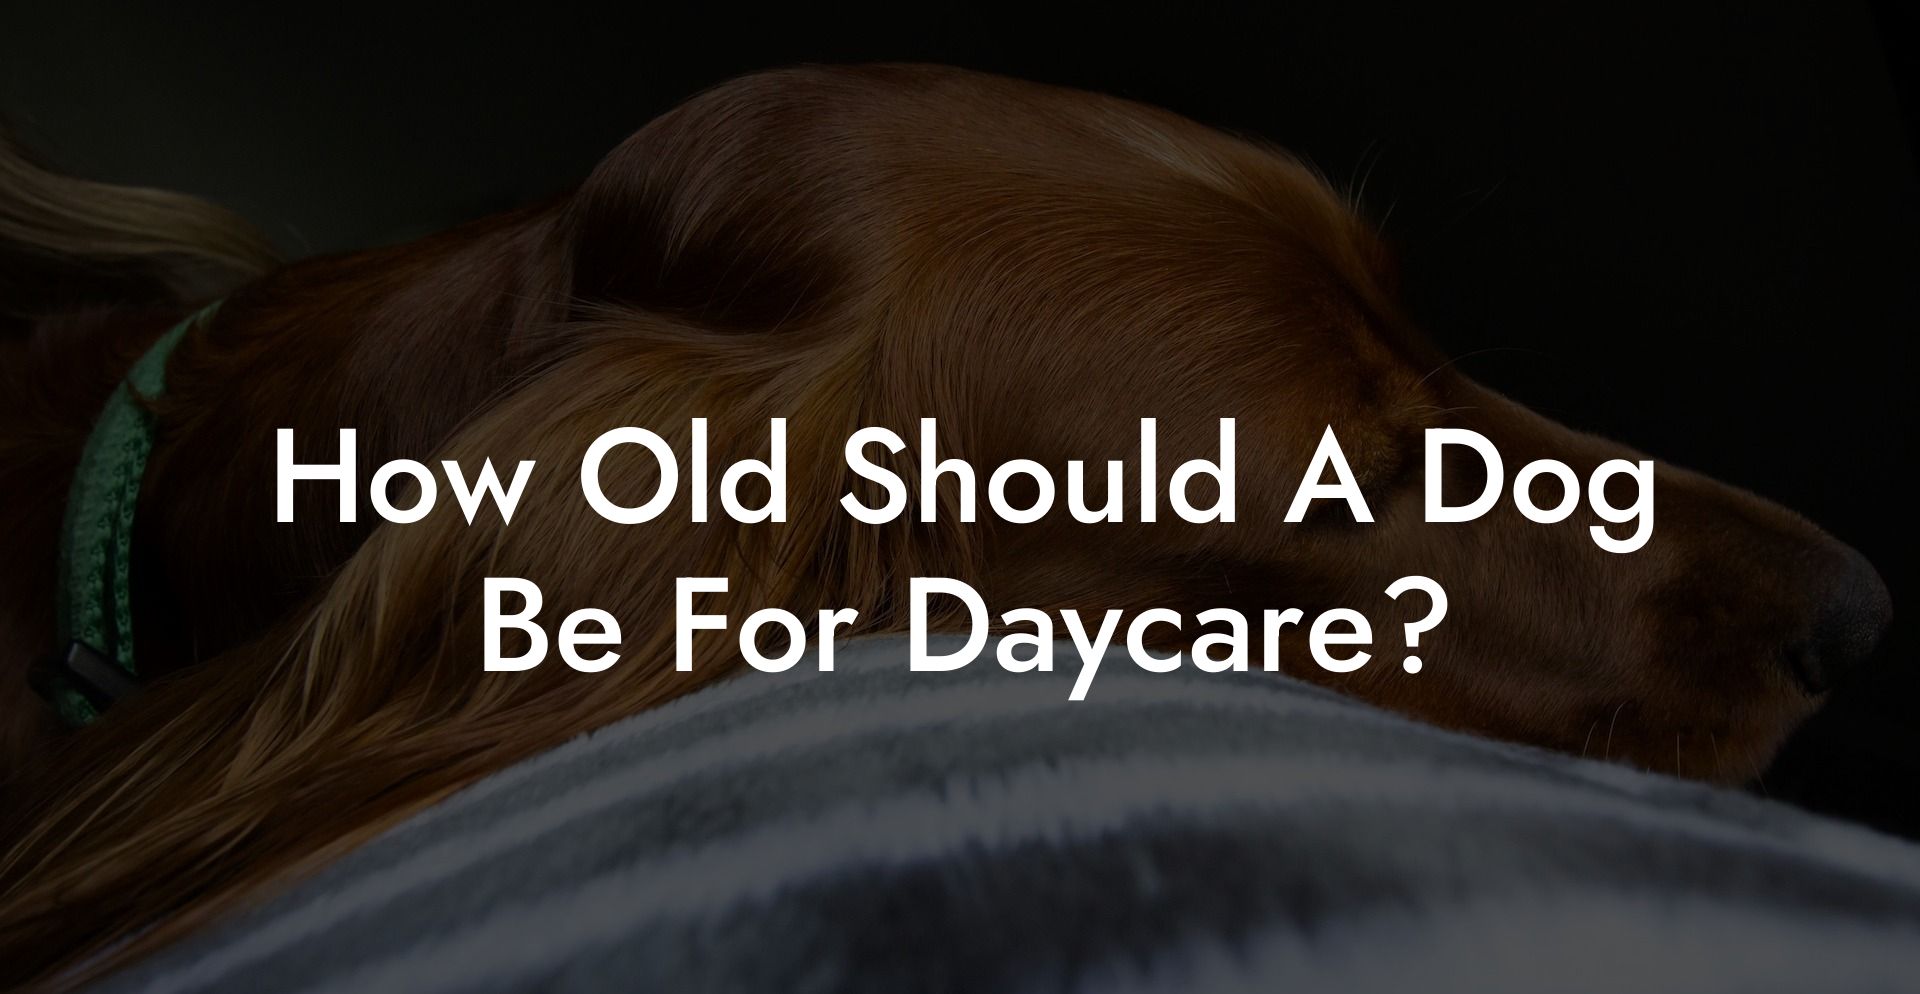 How Old Should A Dog Be For Daycare?